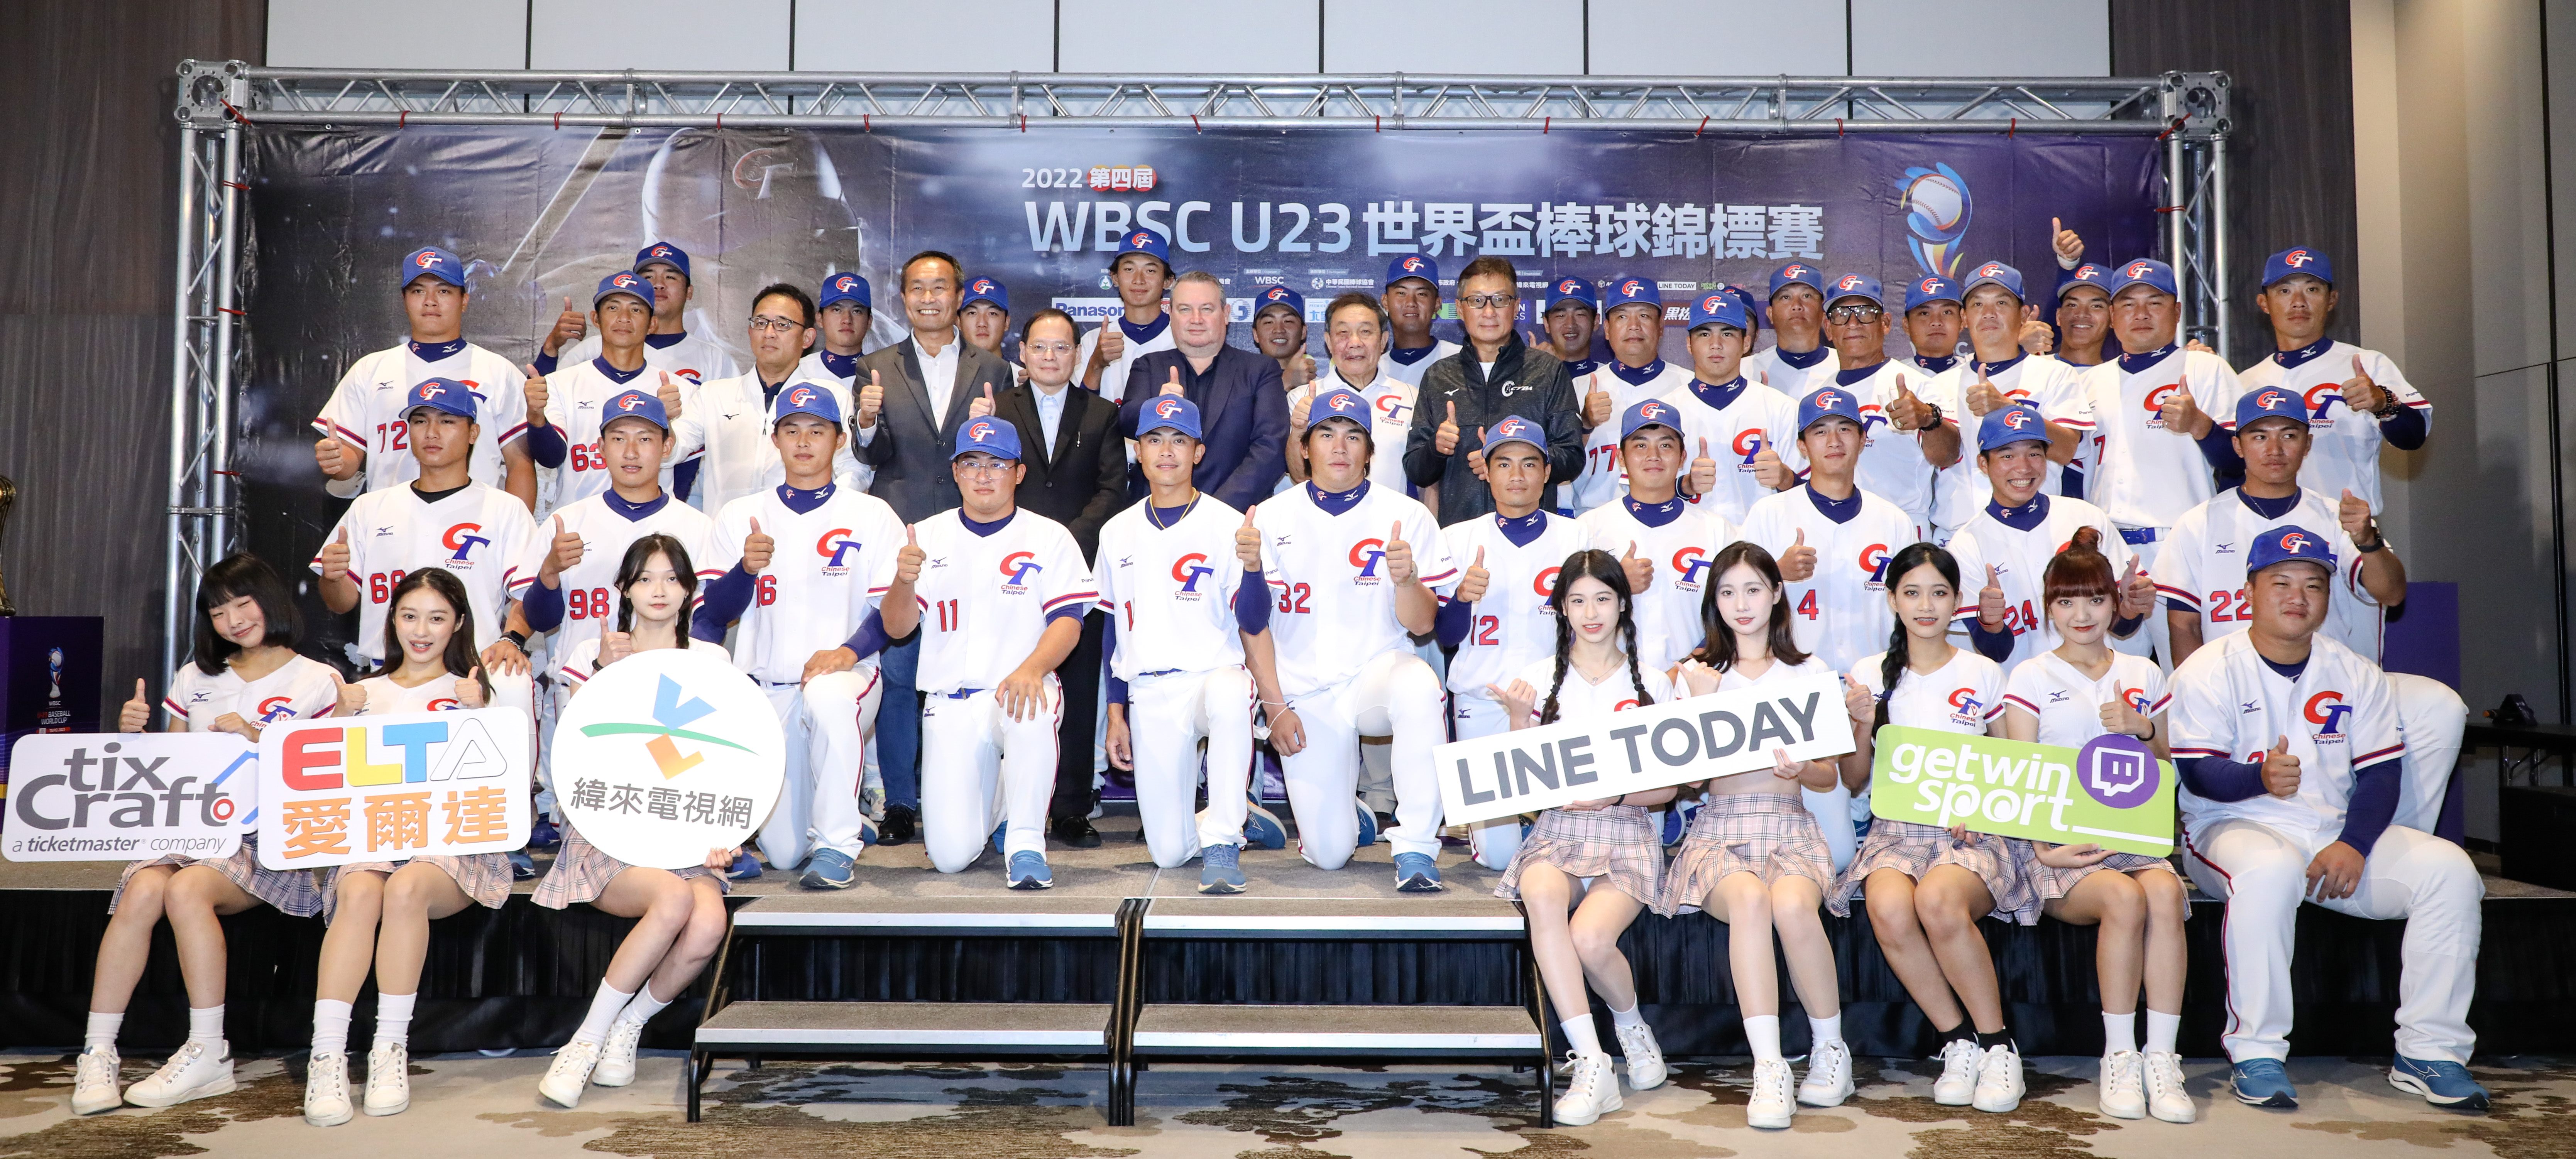 Press conference for the WBSC U23 Baseball Championship